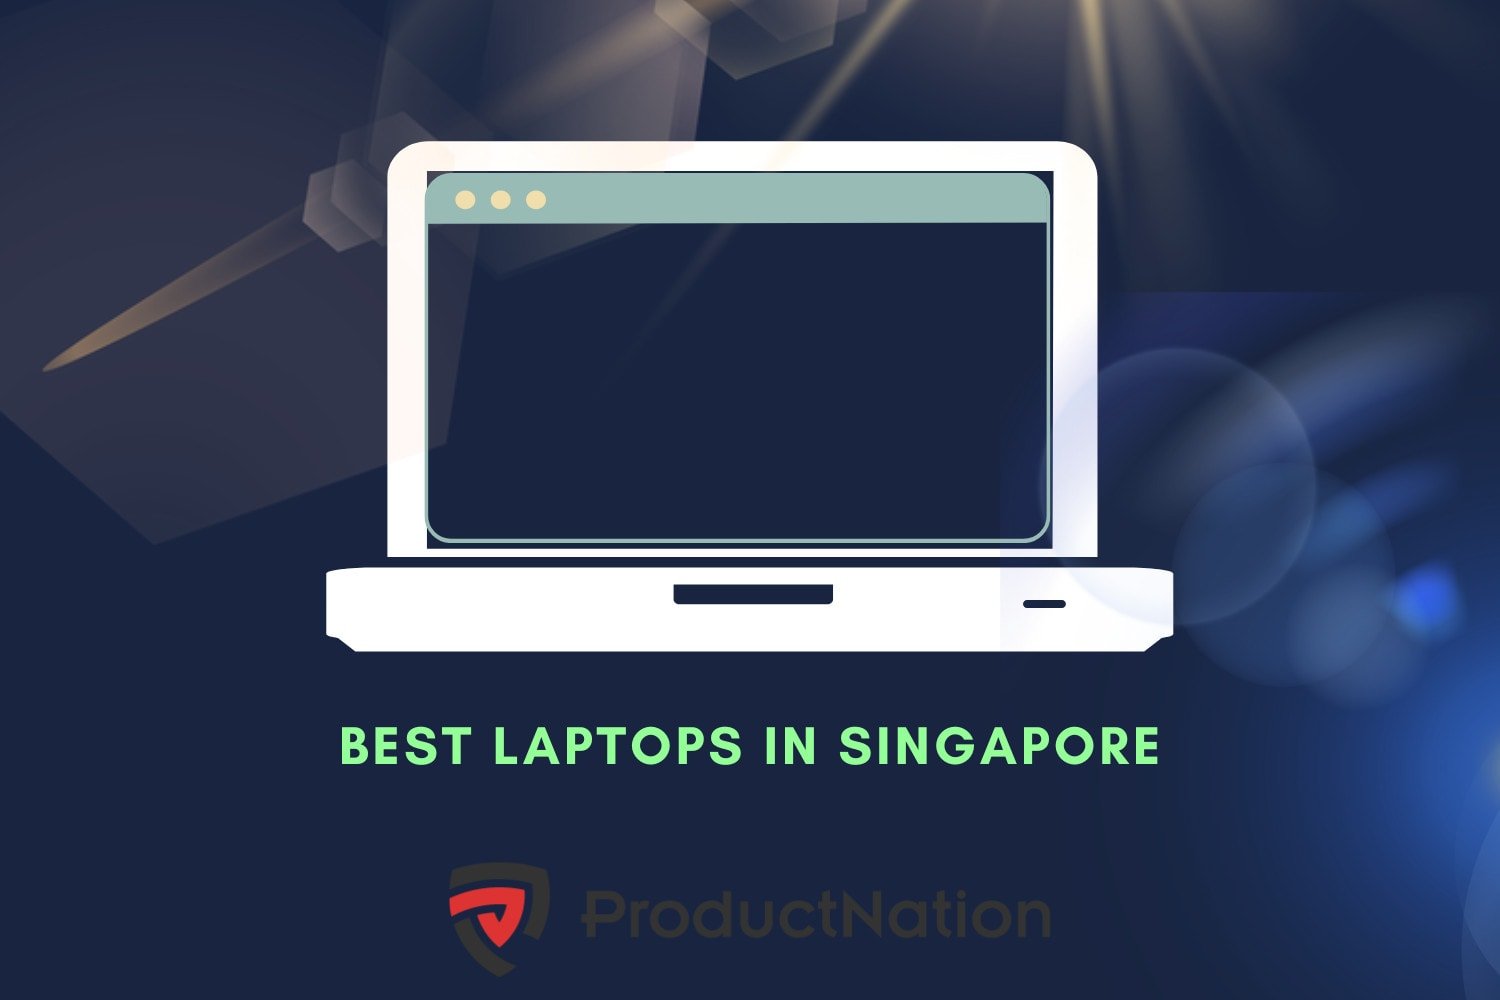 best prices for macbook air